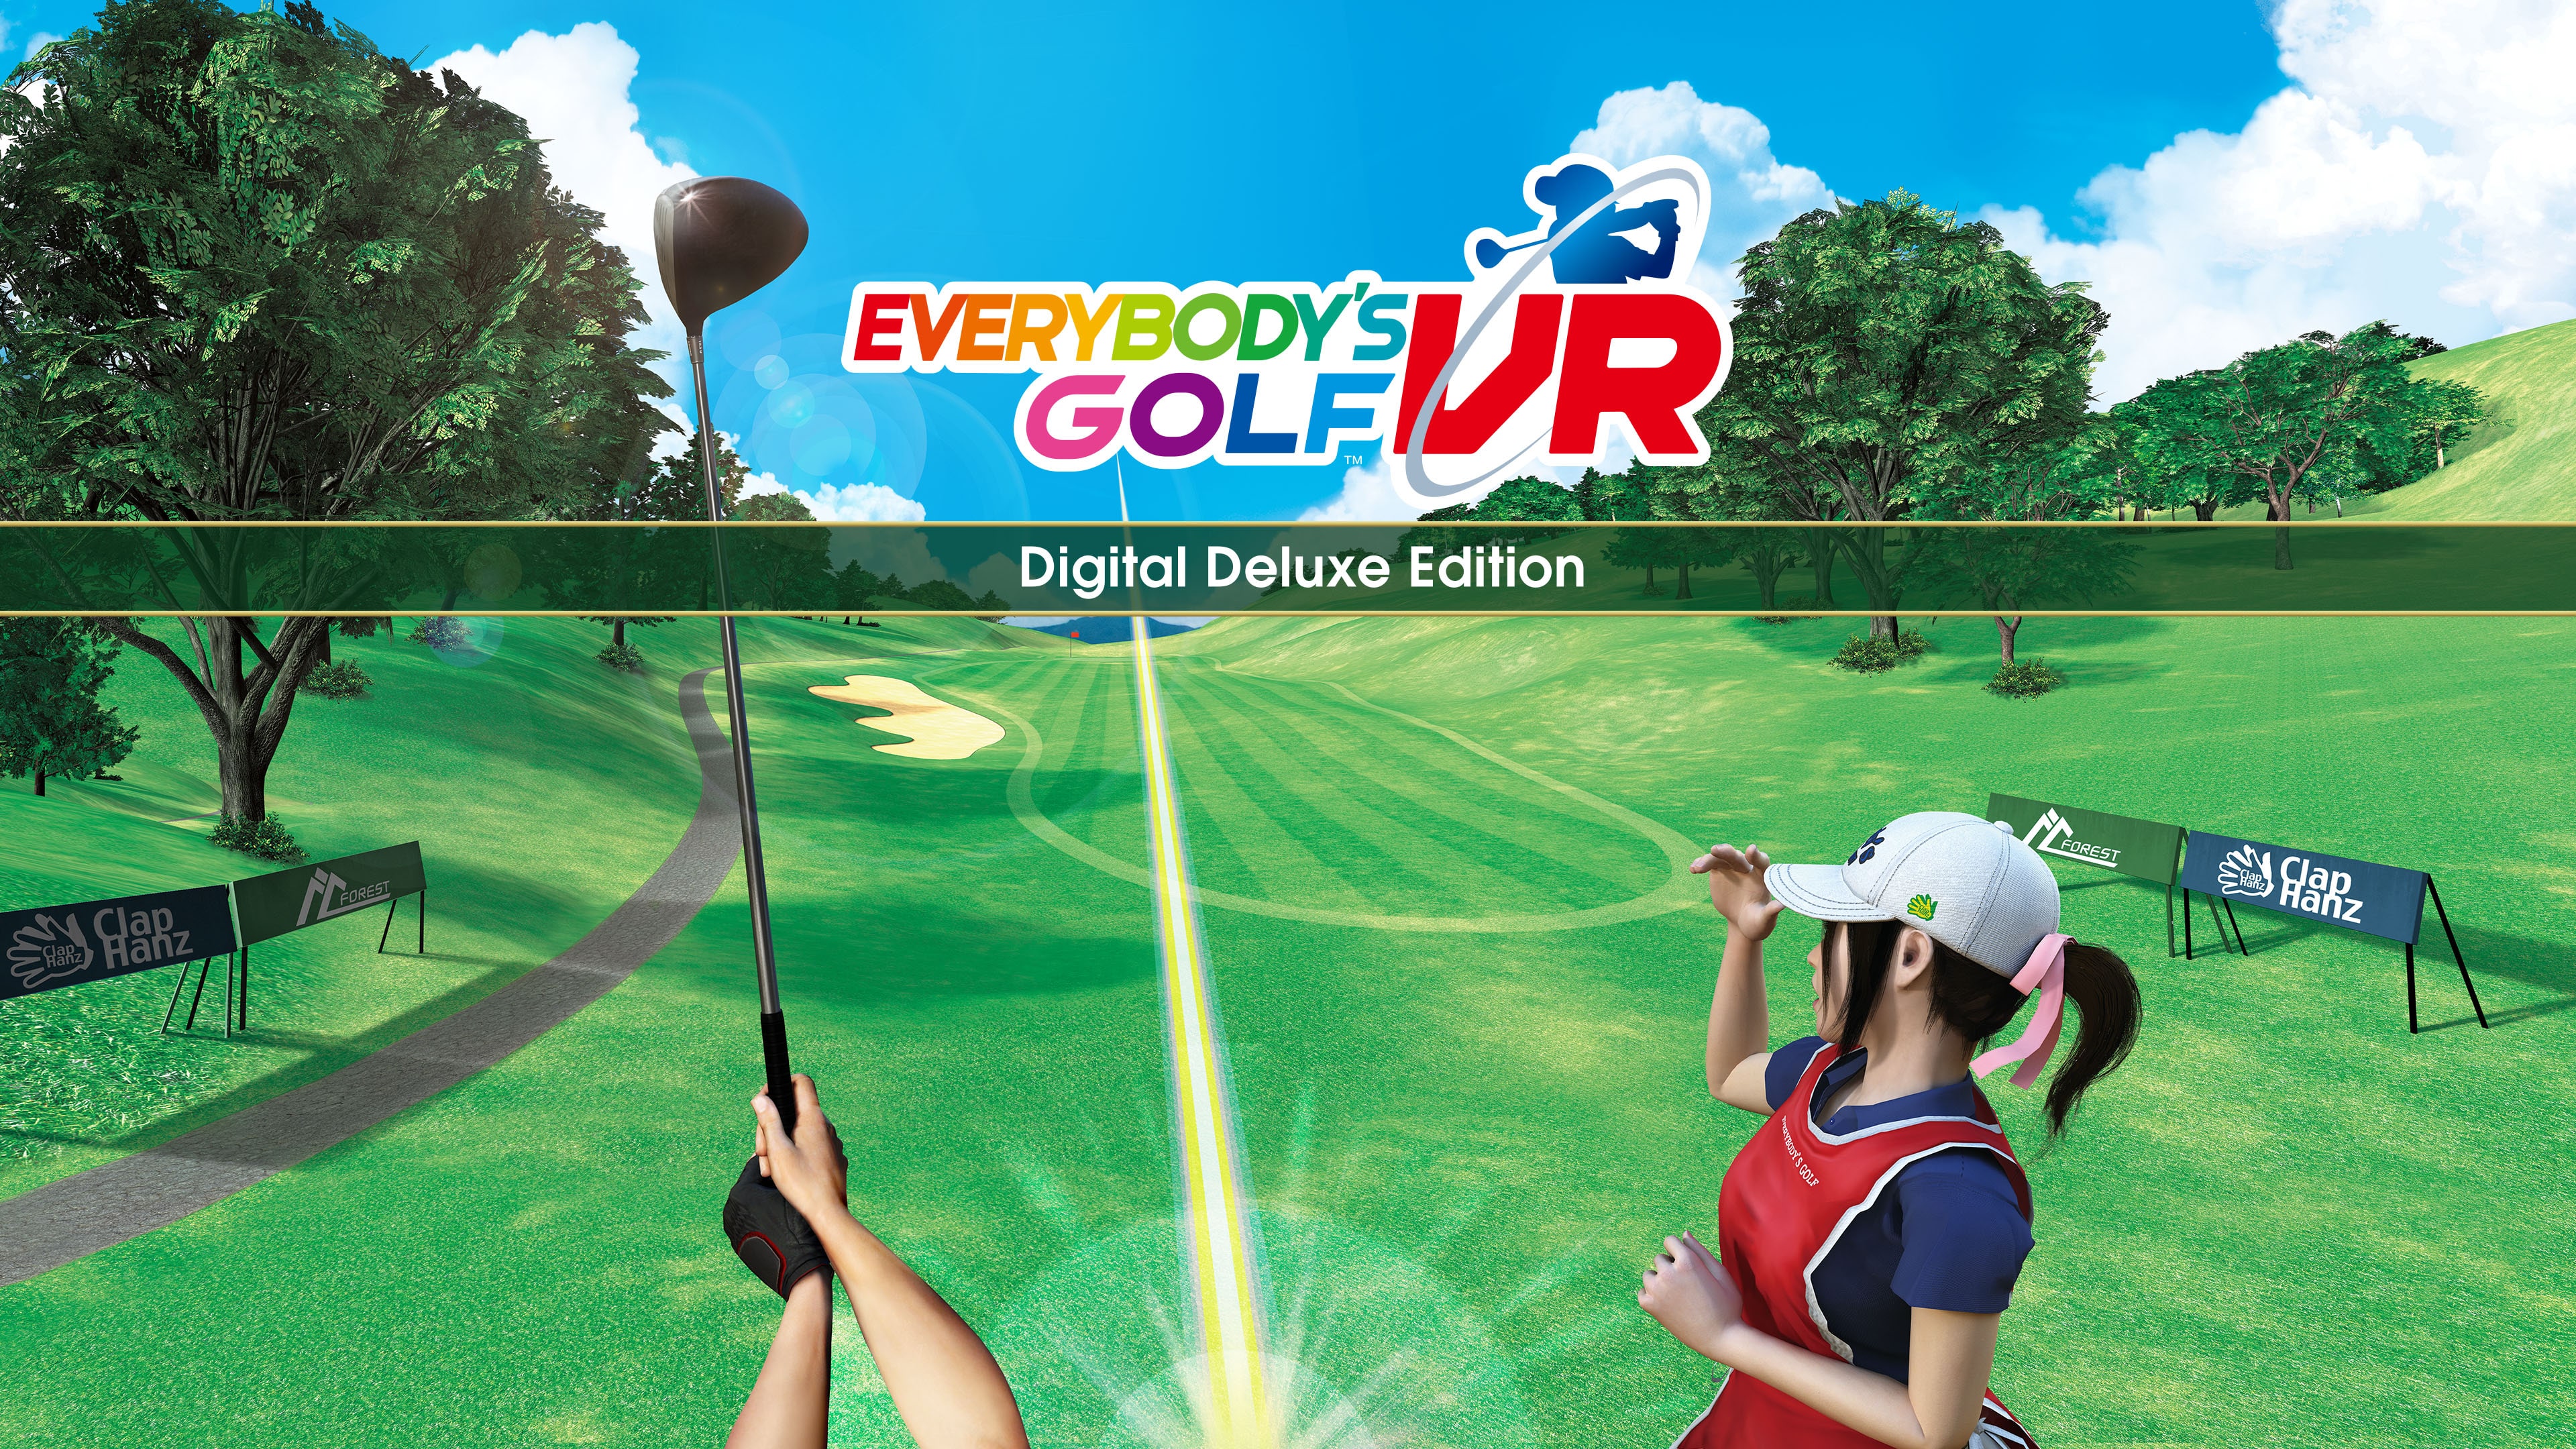 Everybody's Golf VR Digital Deluxe Edition (English, Korean, Traditional Chinese)